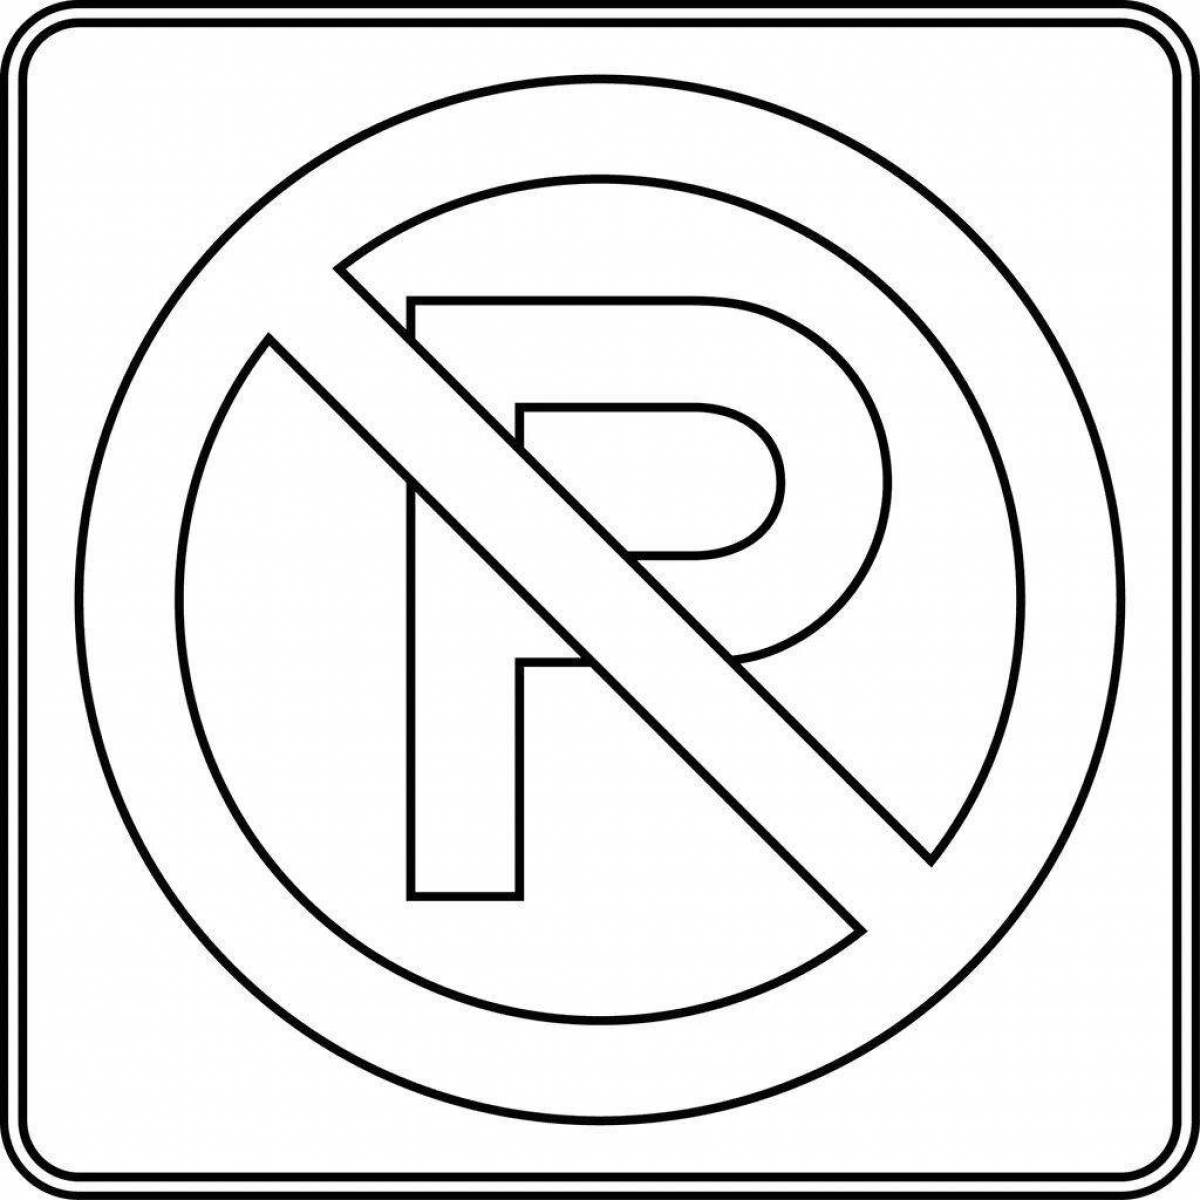 Coloring page joyful prohibition road sign